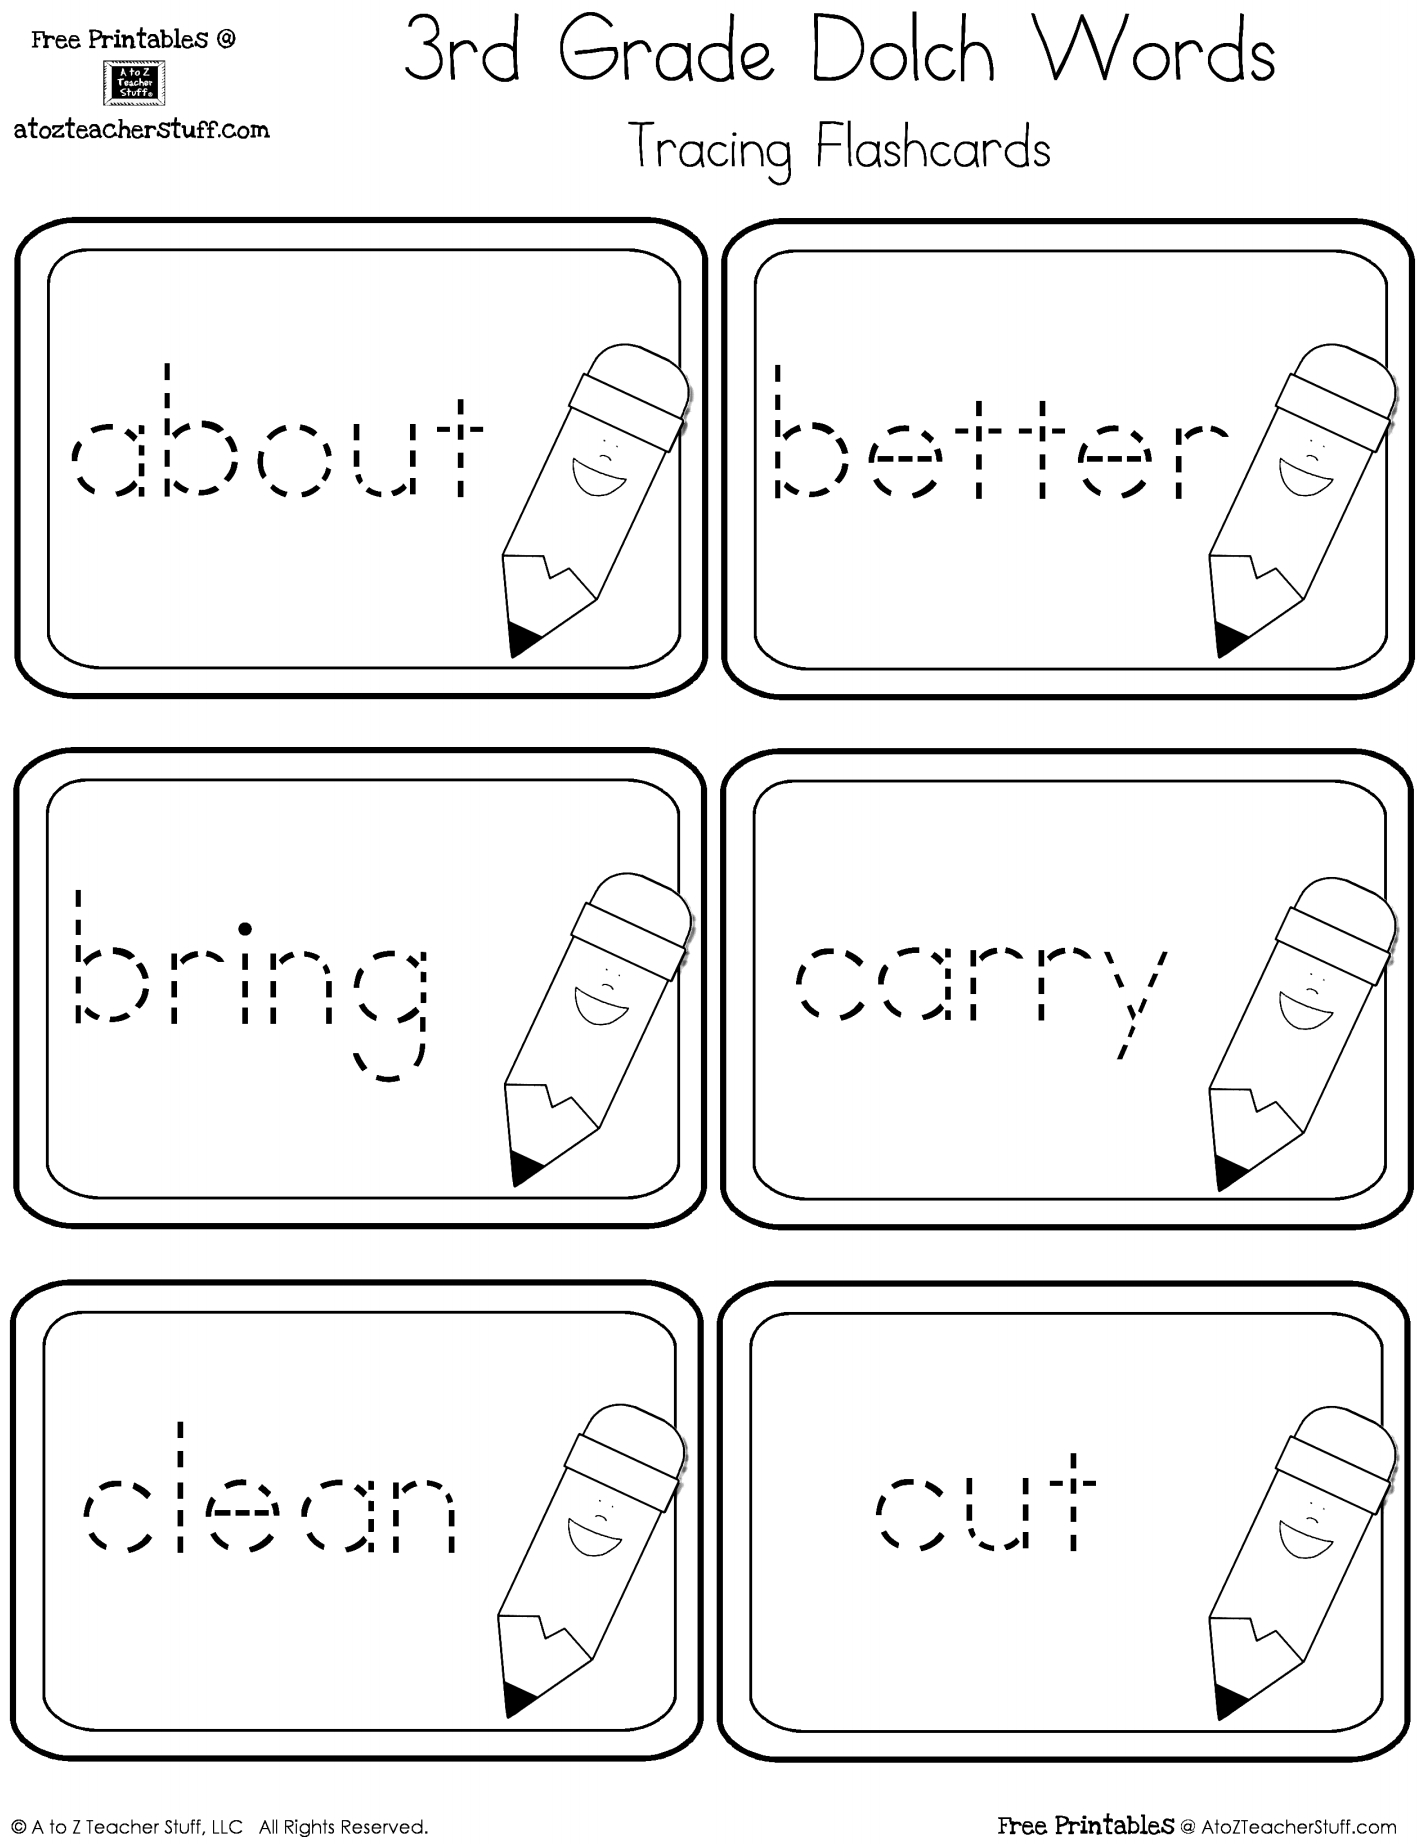 Third Grade Dolch Sight Words Tracing Flashcards | A To Z Teacher - Free Printable Grade Cards